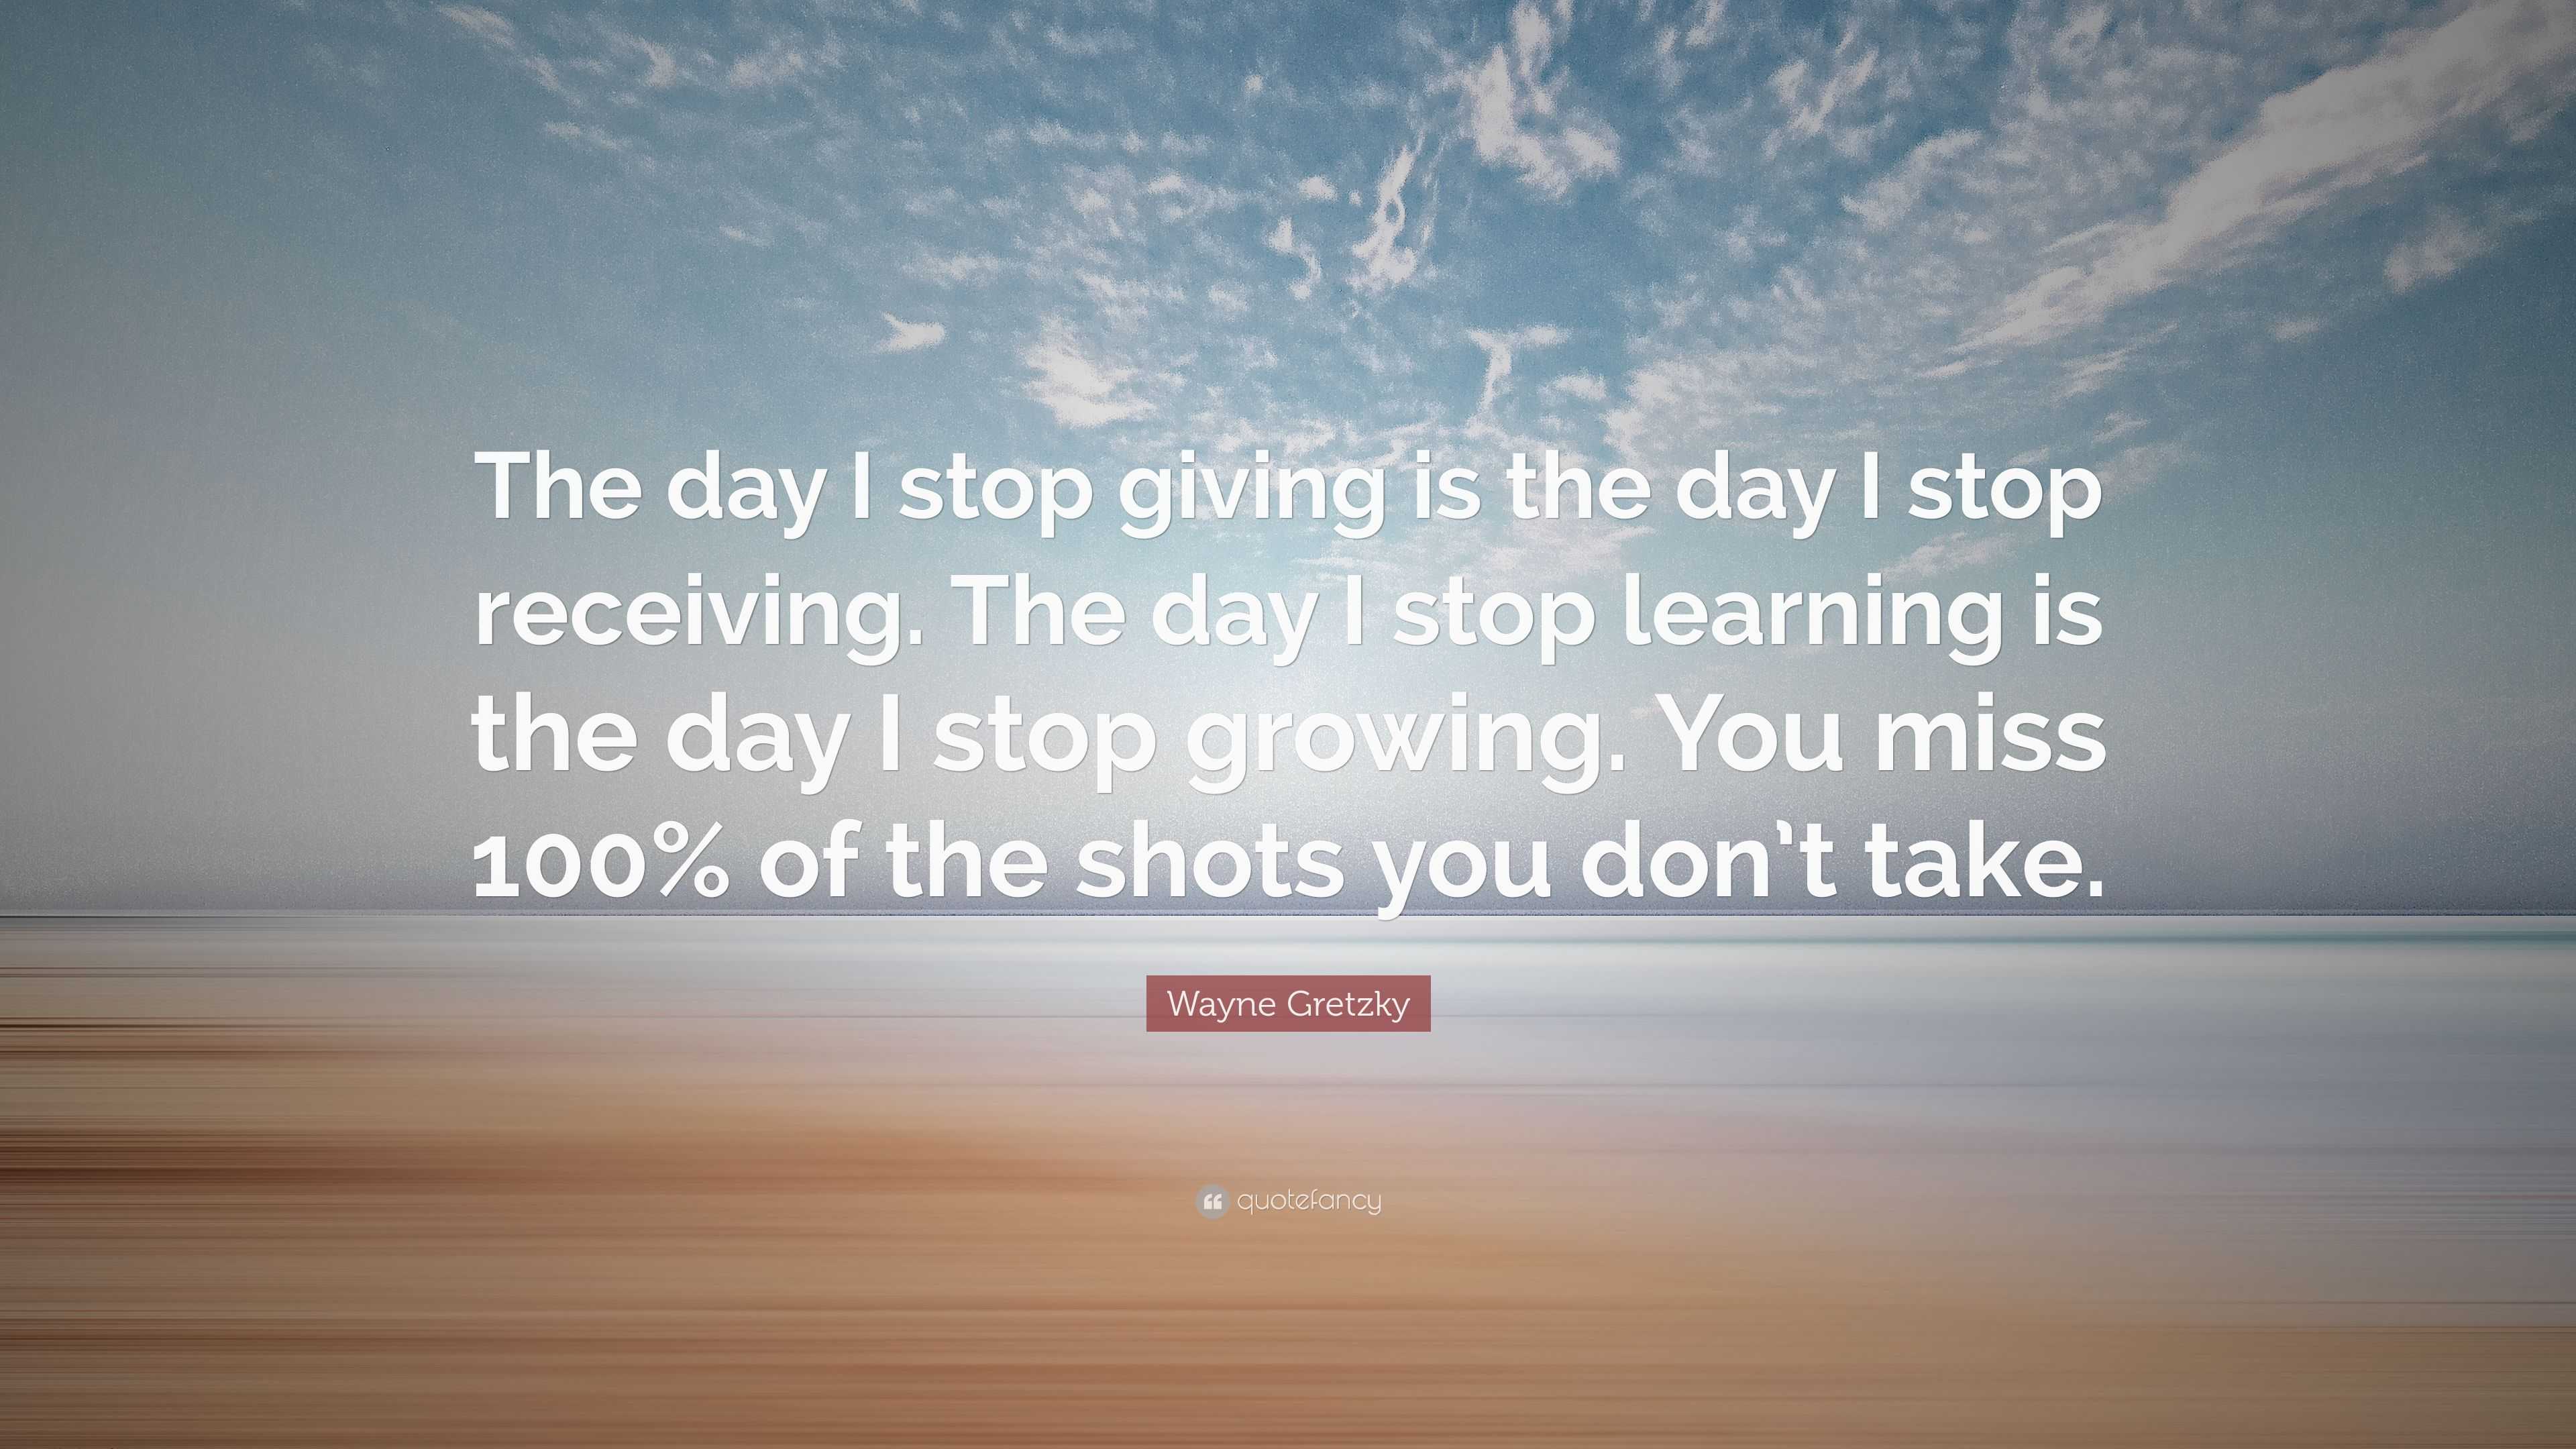 Wayne Gretzky Quote: “The day I stop giving is the day I stop receiving